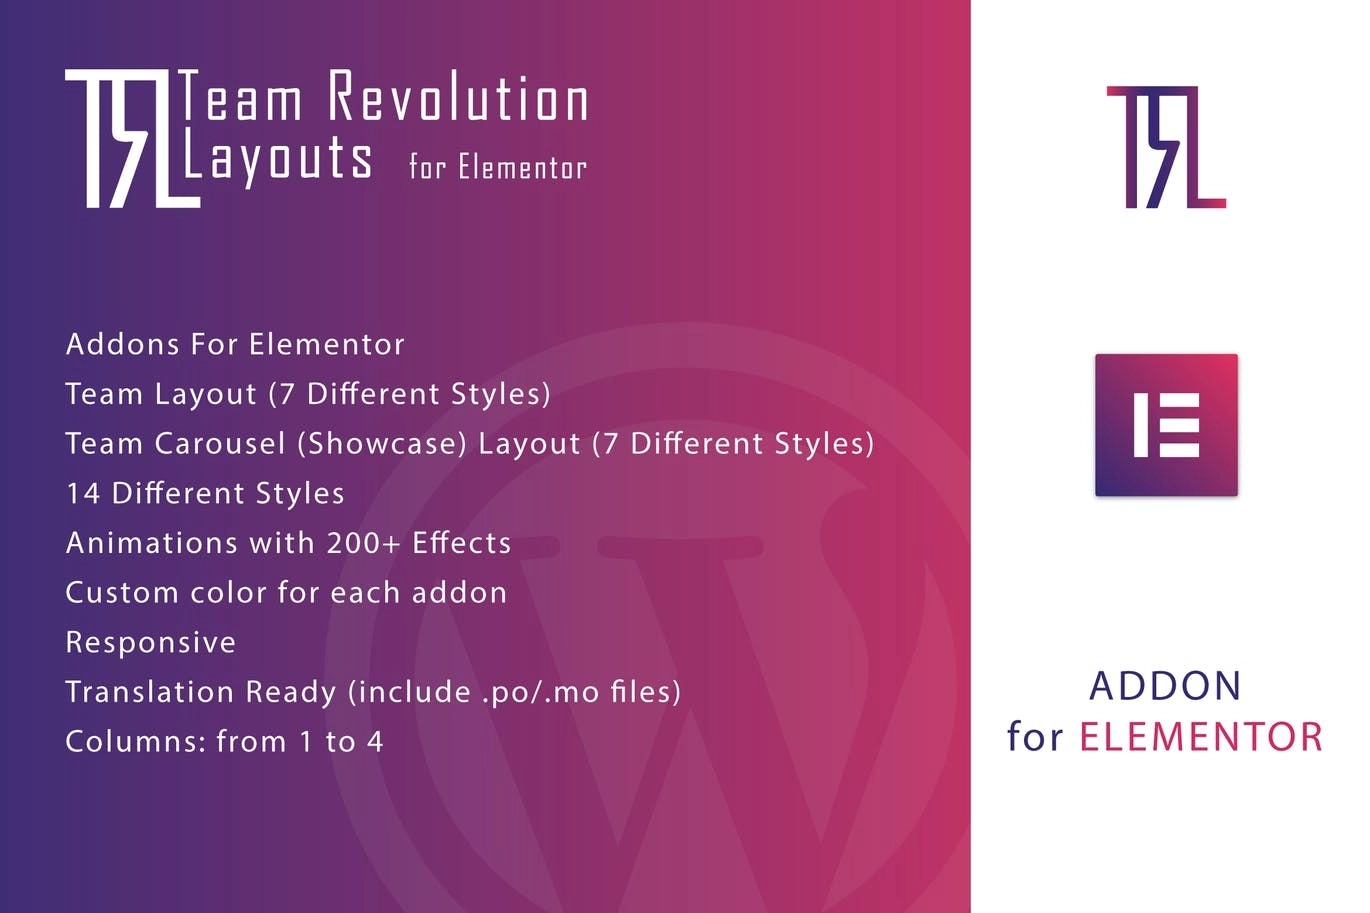 team revolution layouts for elementor 1 0 0 download authormsa creation datesep 3 2021 650e3a1a27df6